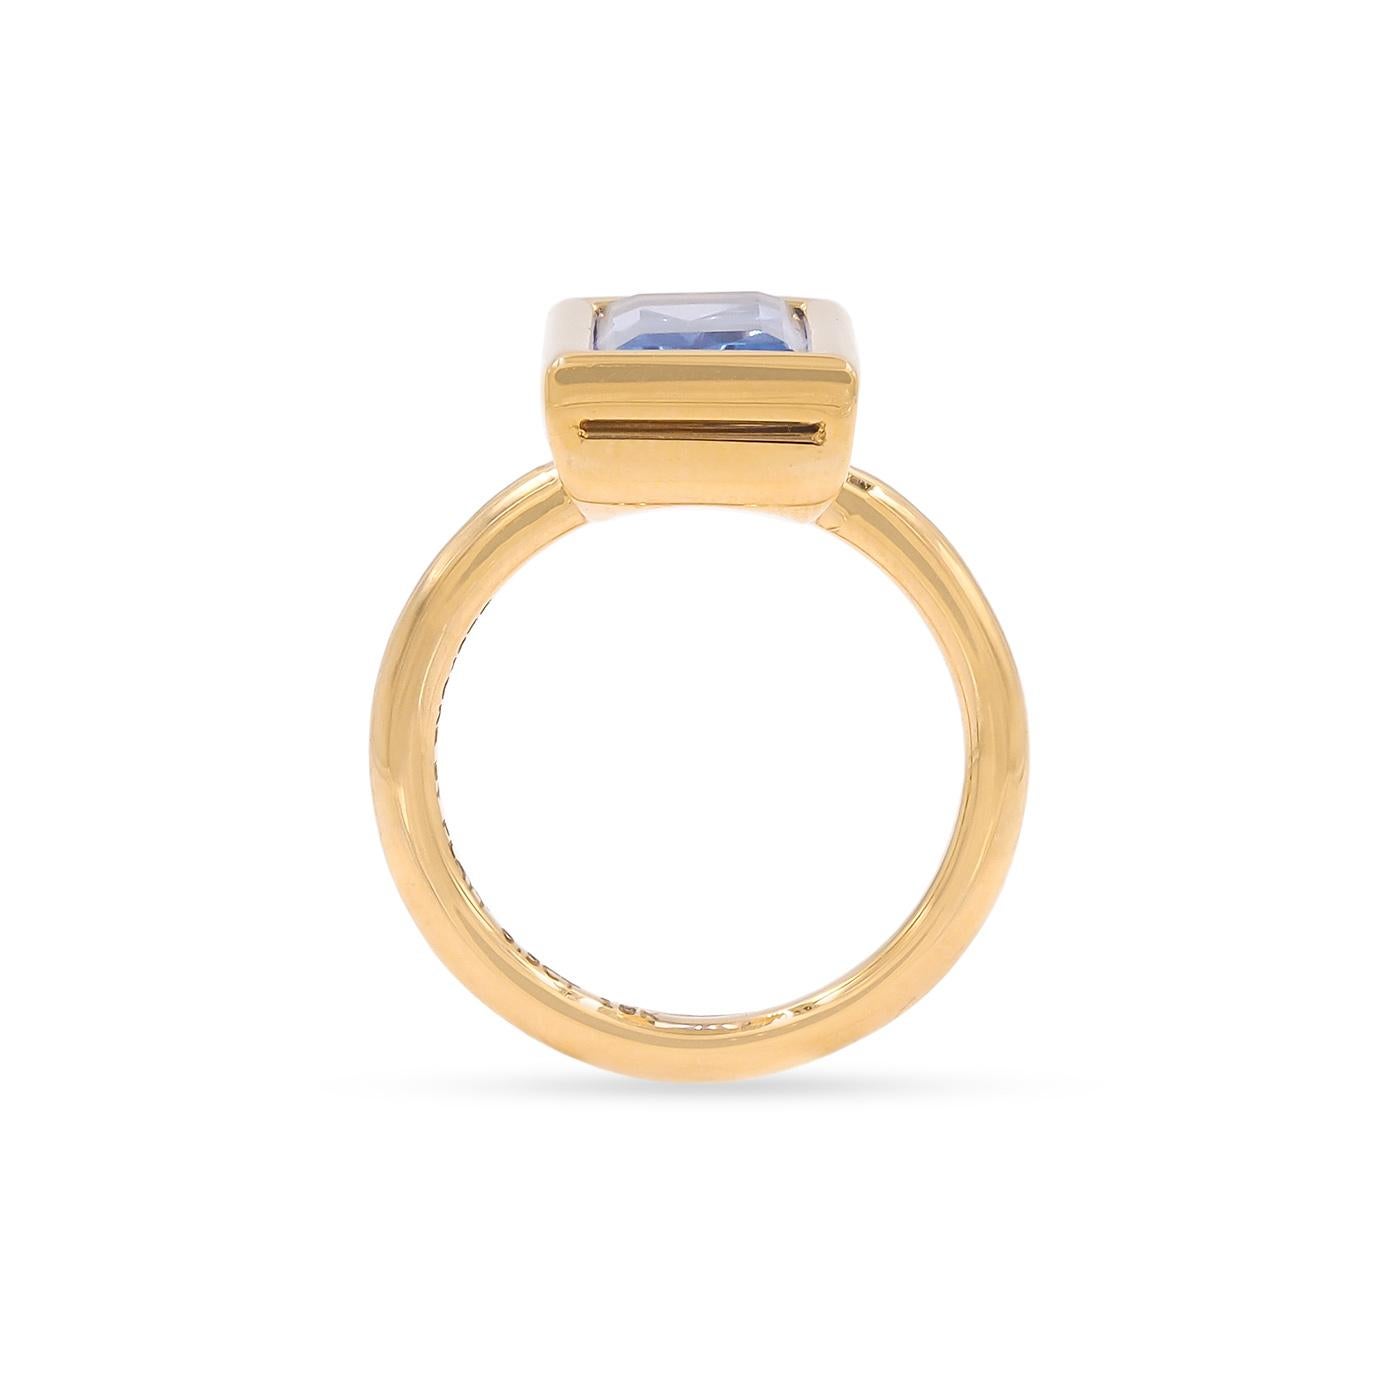 Contemporary 6.50 Carat Ceylon AGL Certified Blue Sapphire Ring from Bespoke by Platt For Sale